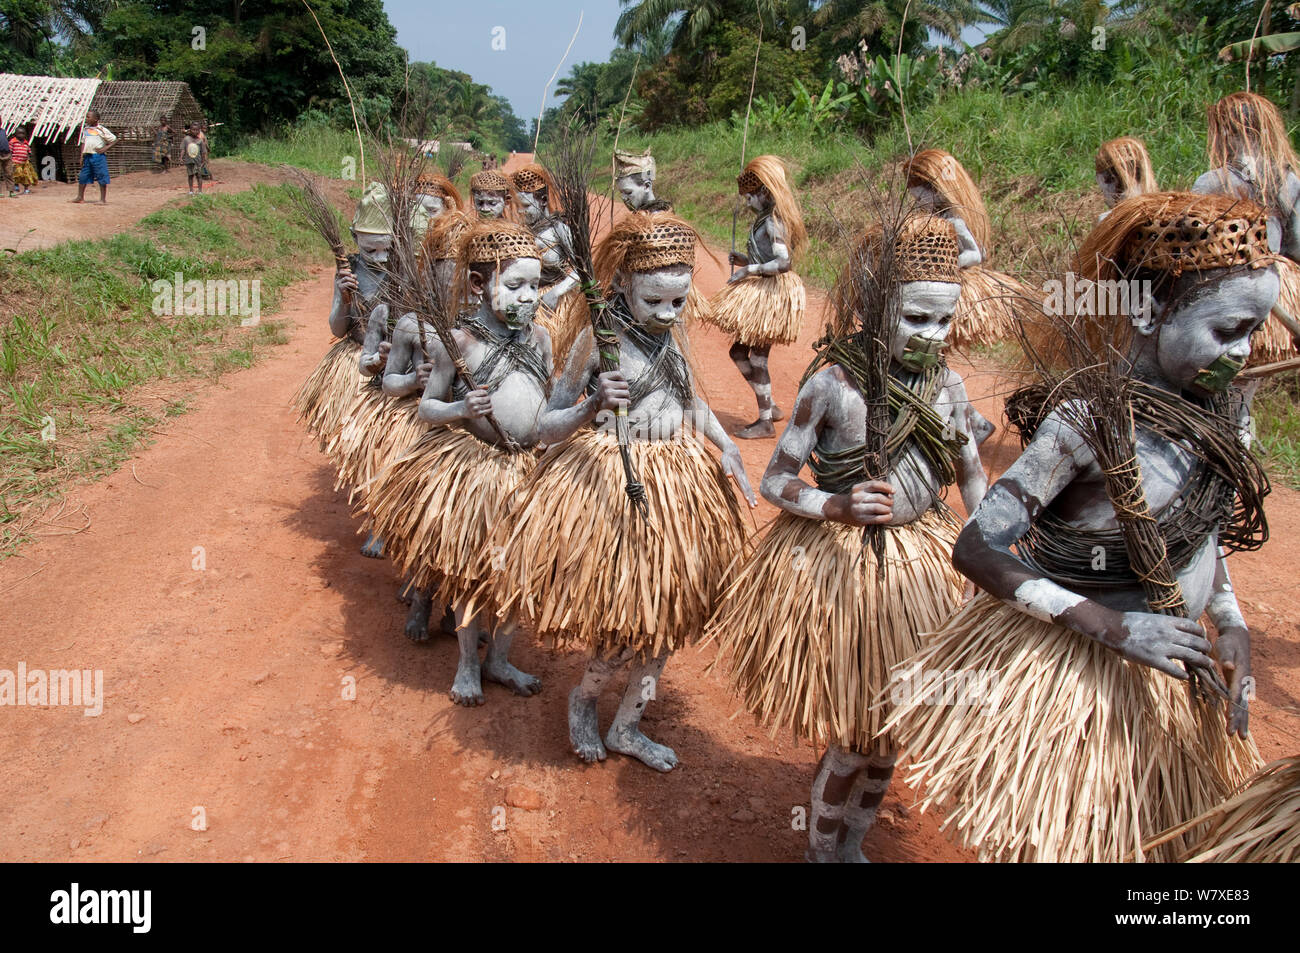 Mbuti Pygmy boys in traditional blue body paint and straw skirts, on way to forest to undergo initiation ceremony, which is a right of passage into manhood. Ituri Rainforest, Democratic Republic of the Congo, Africa, November2011. Stock Photo